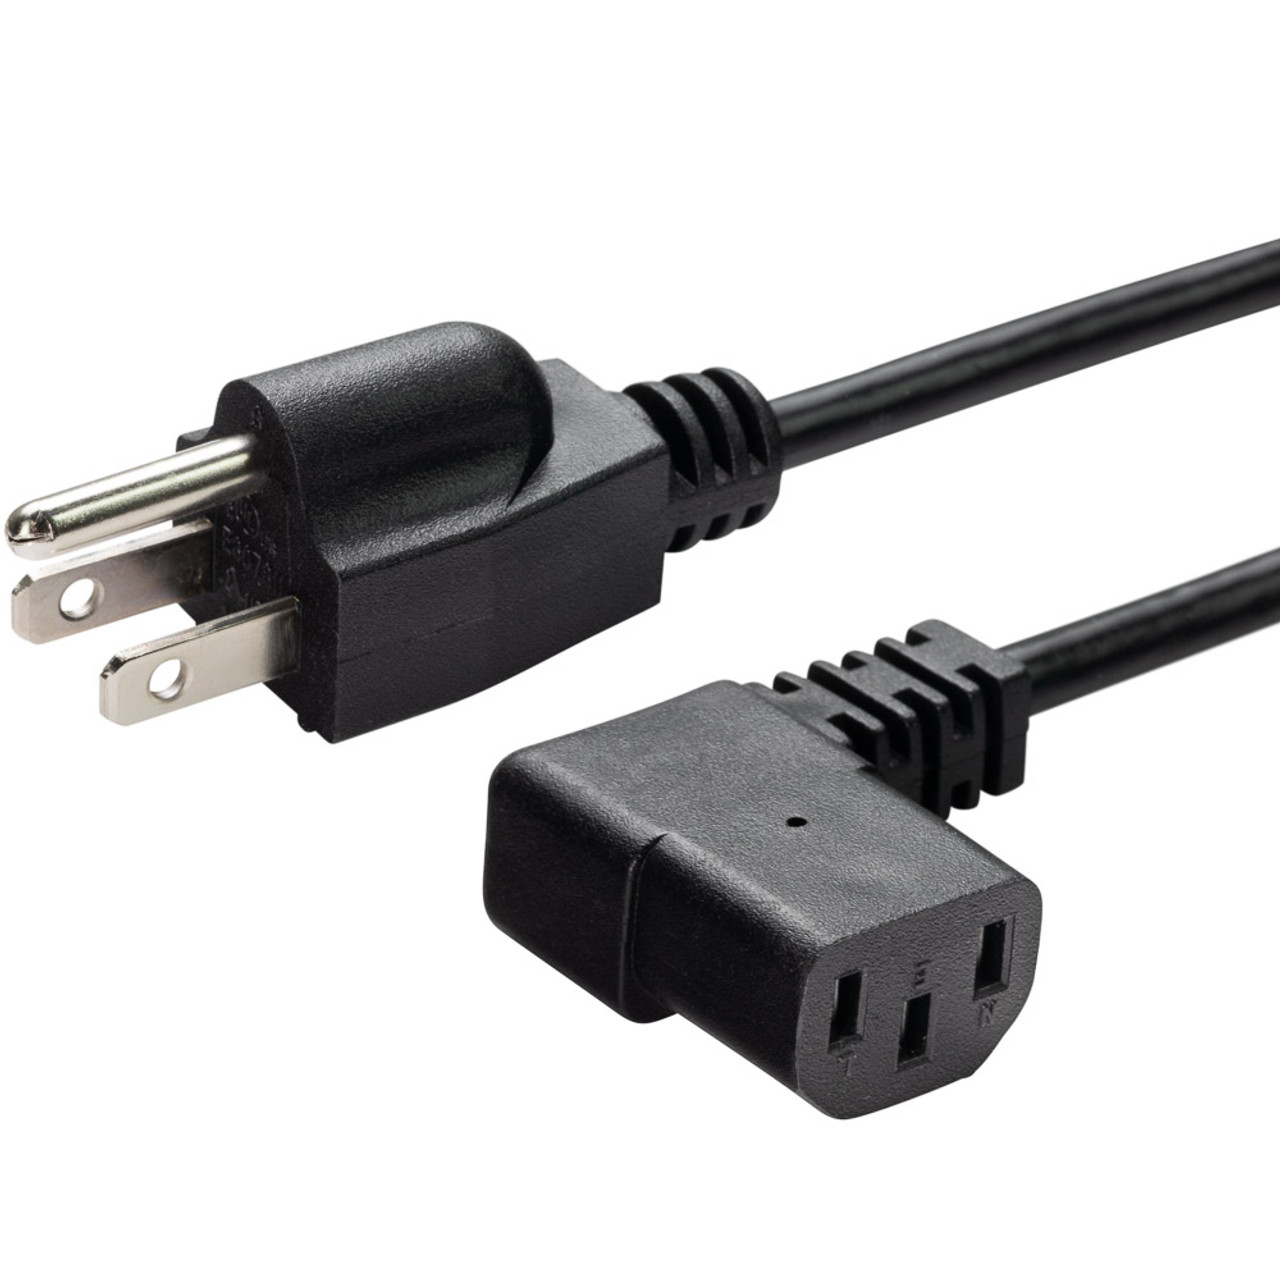 NavePoint 3-Prong AC Right Angle Power Cord 15 Ft Black